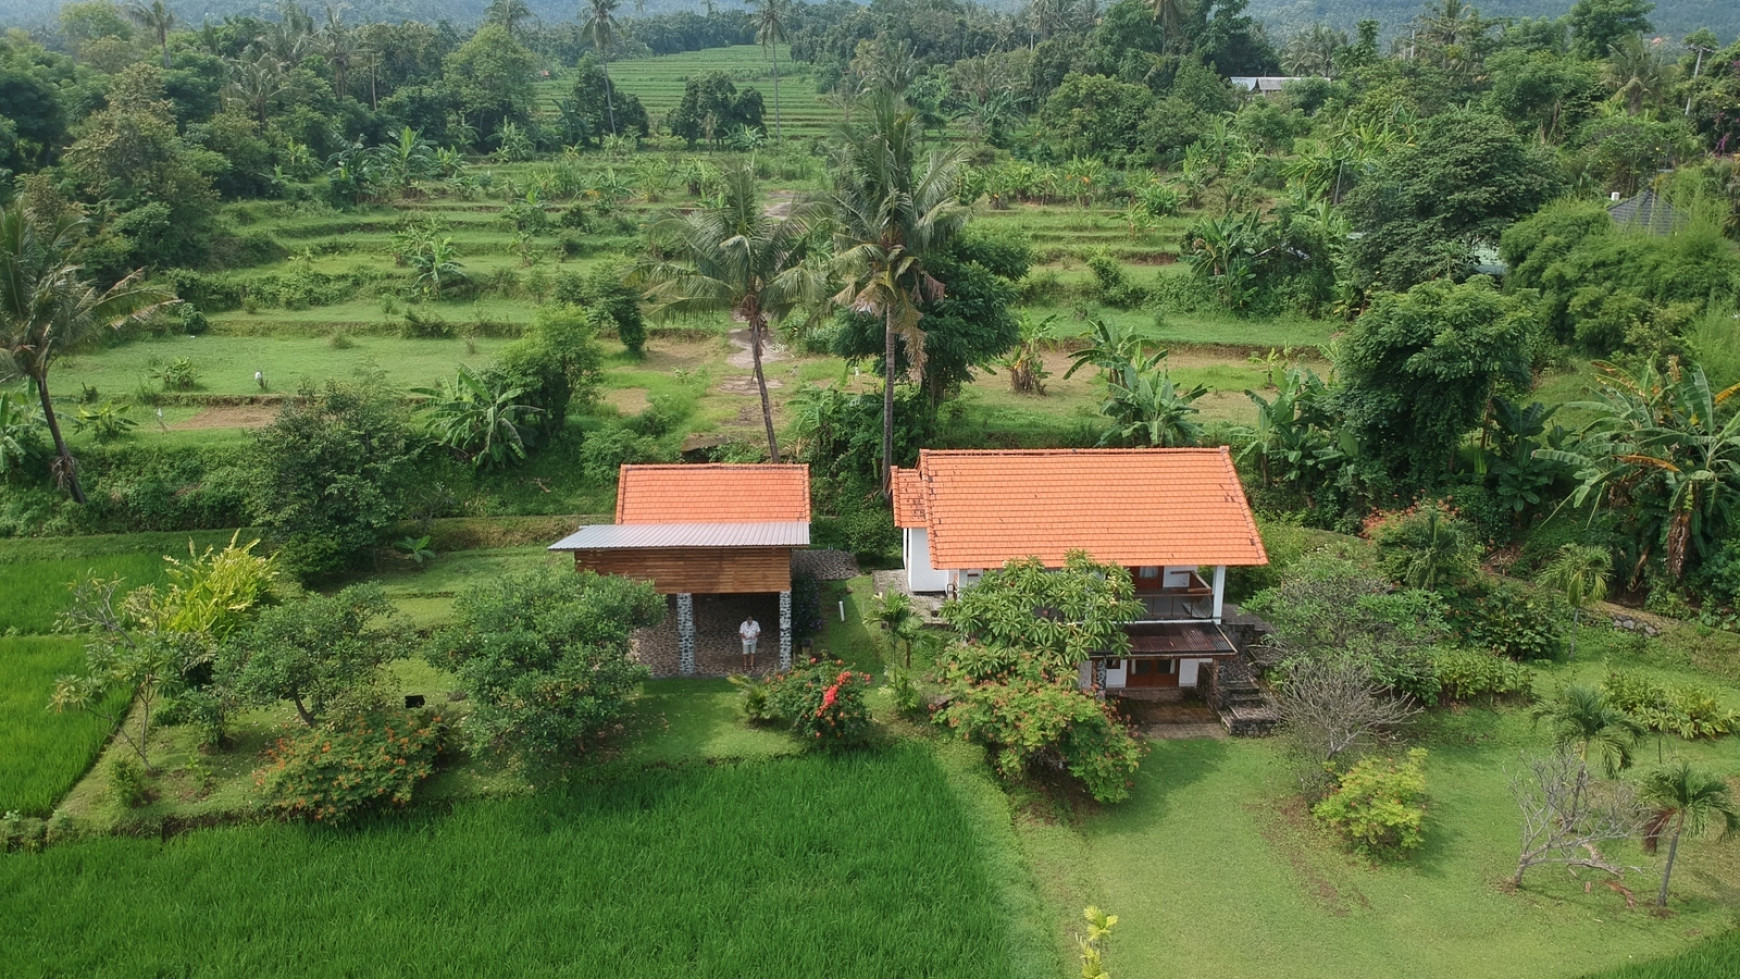 8140 M2 amazing land for sale!